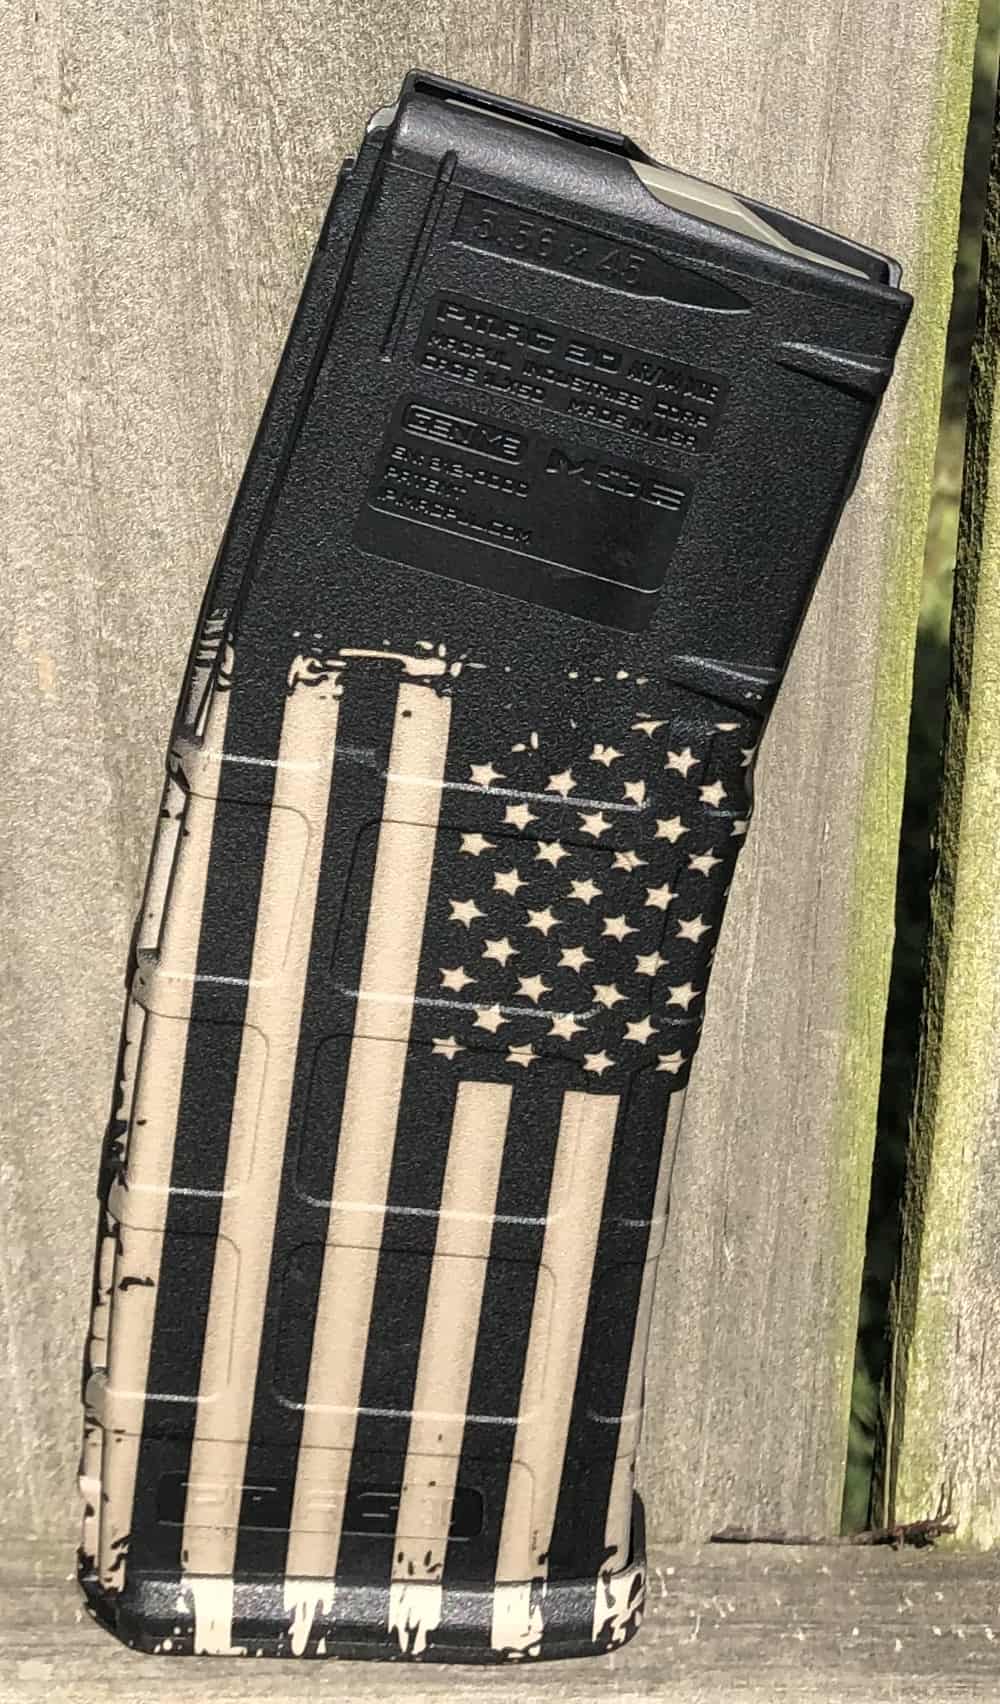 5.56 AR15 Magazine Stickers S&W Mag Black Ops American Flags Lower Decals 